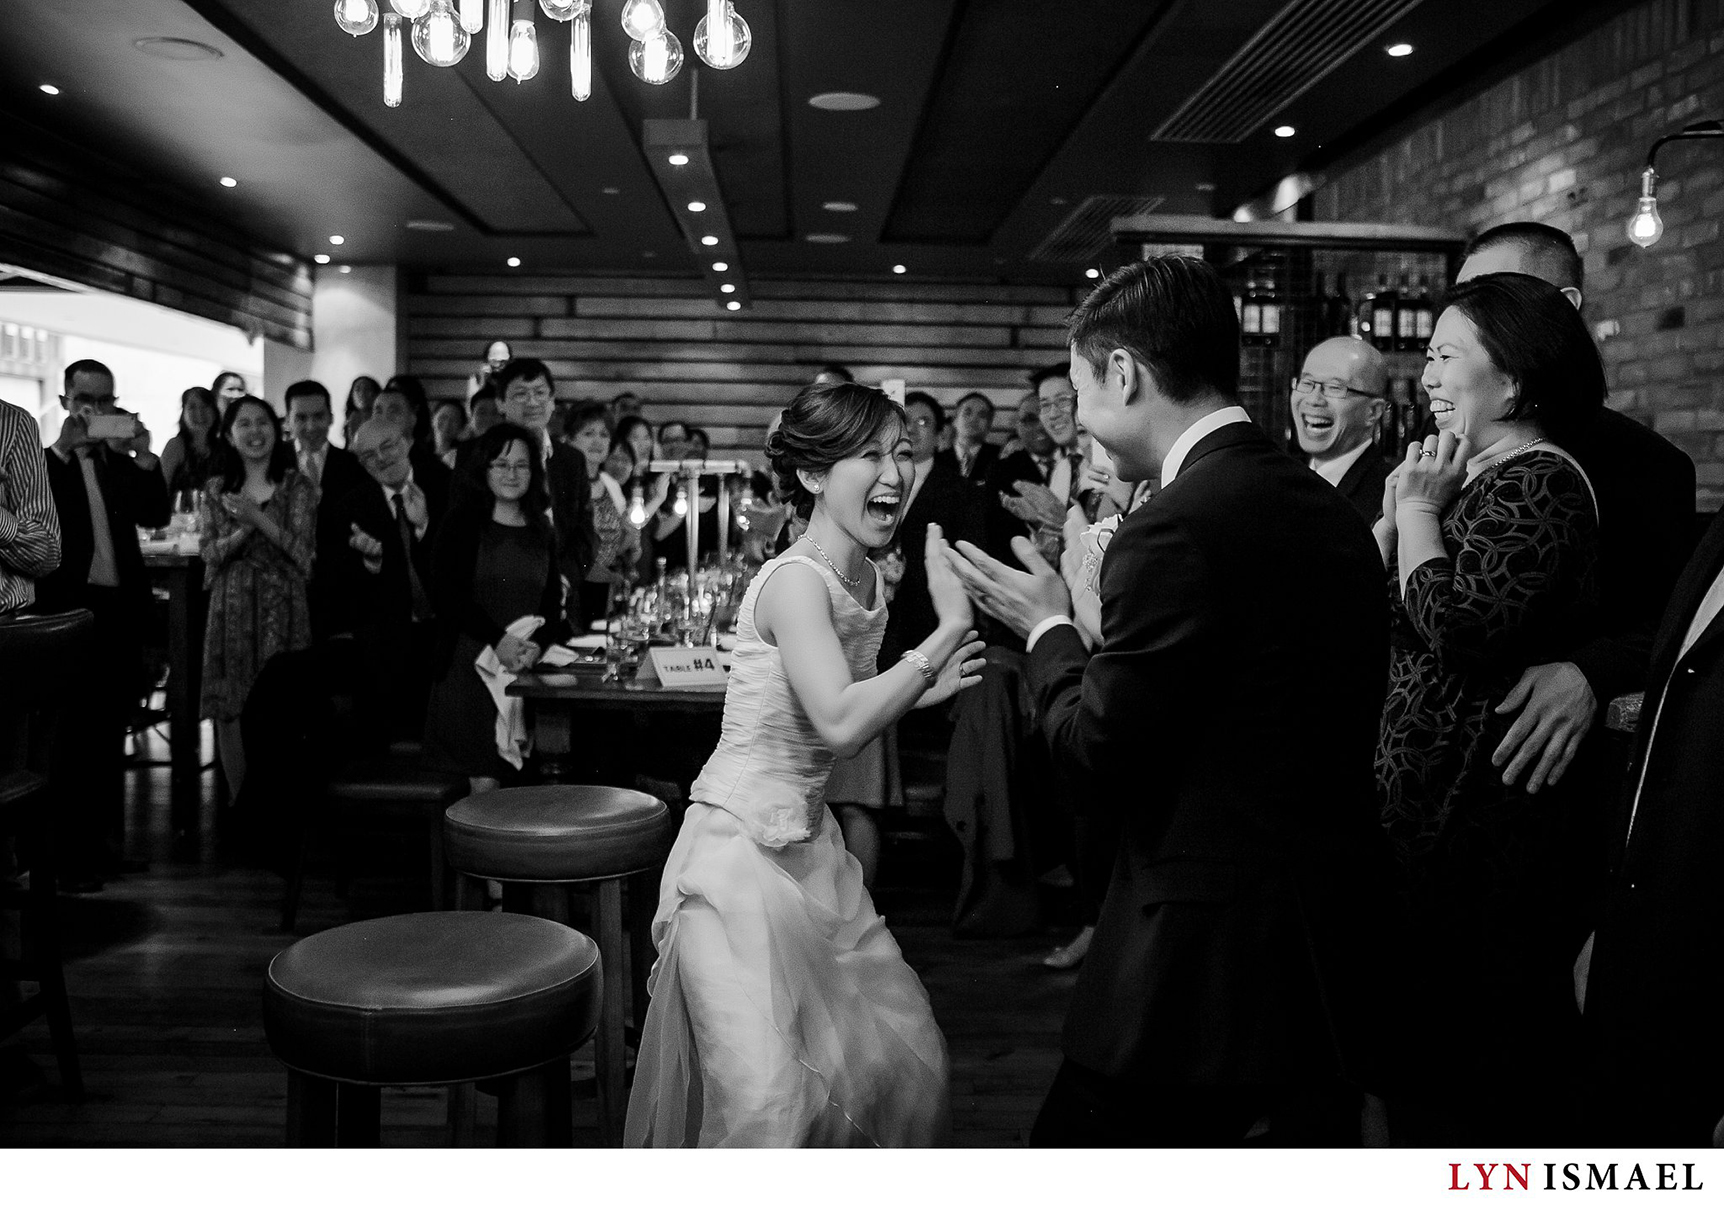 Moment driven wedding photographer captures the bride and groom's entrance at their wedding reception at Reds Wine Tavern in Toronto, Ontario.